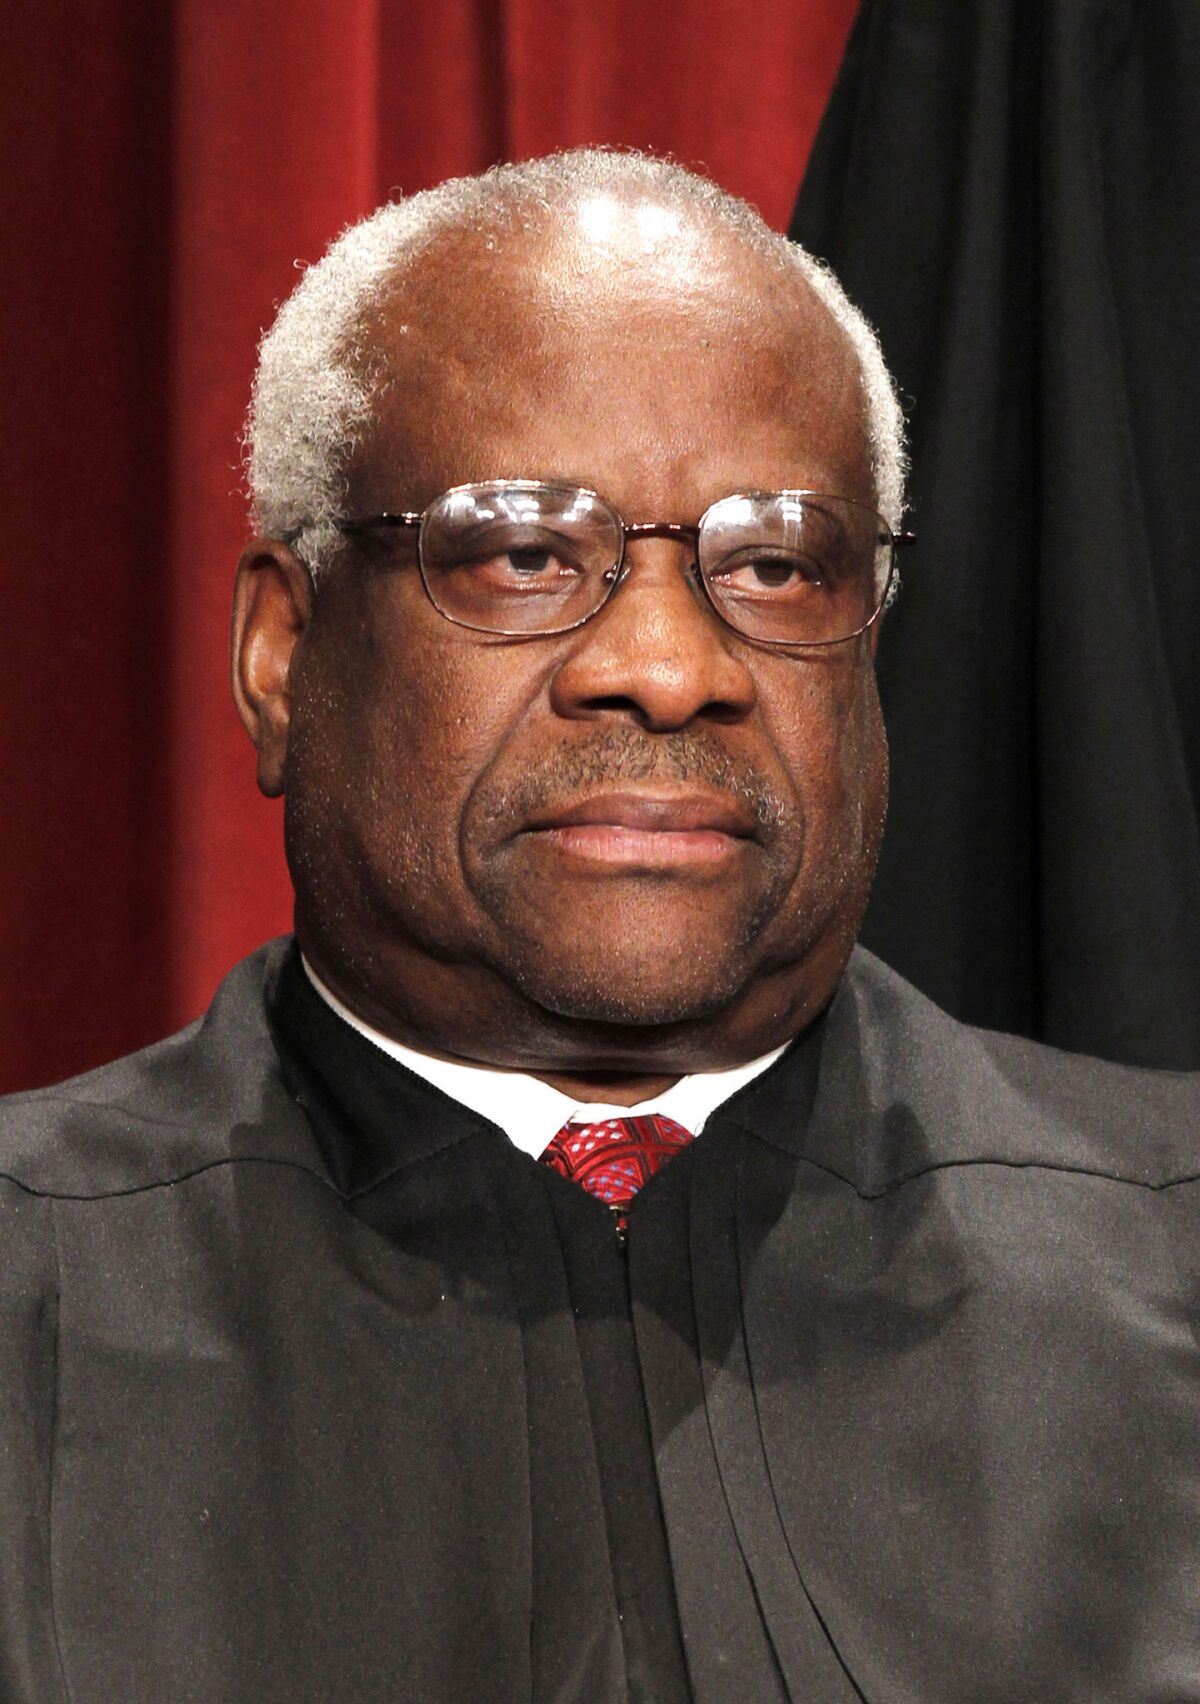 Justice Clarence Thomas wrote the majority opinion in the case.